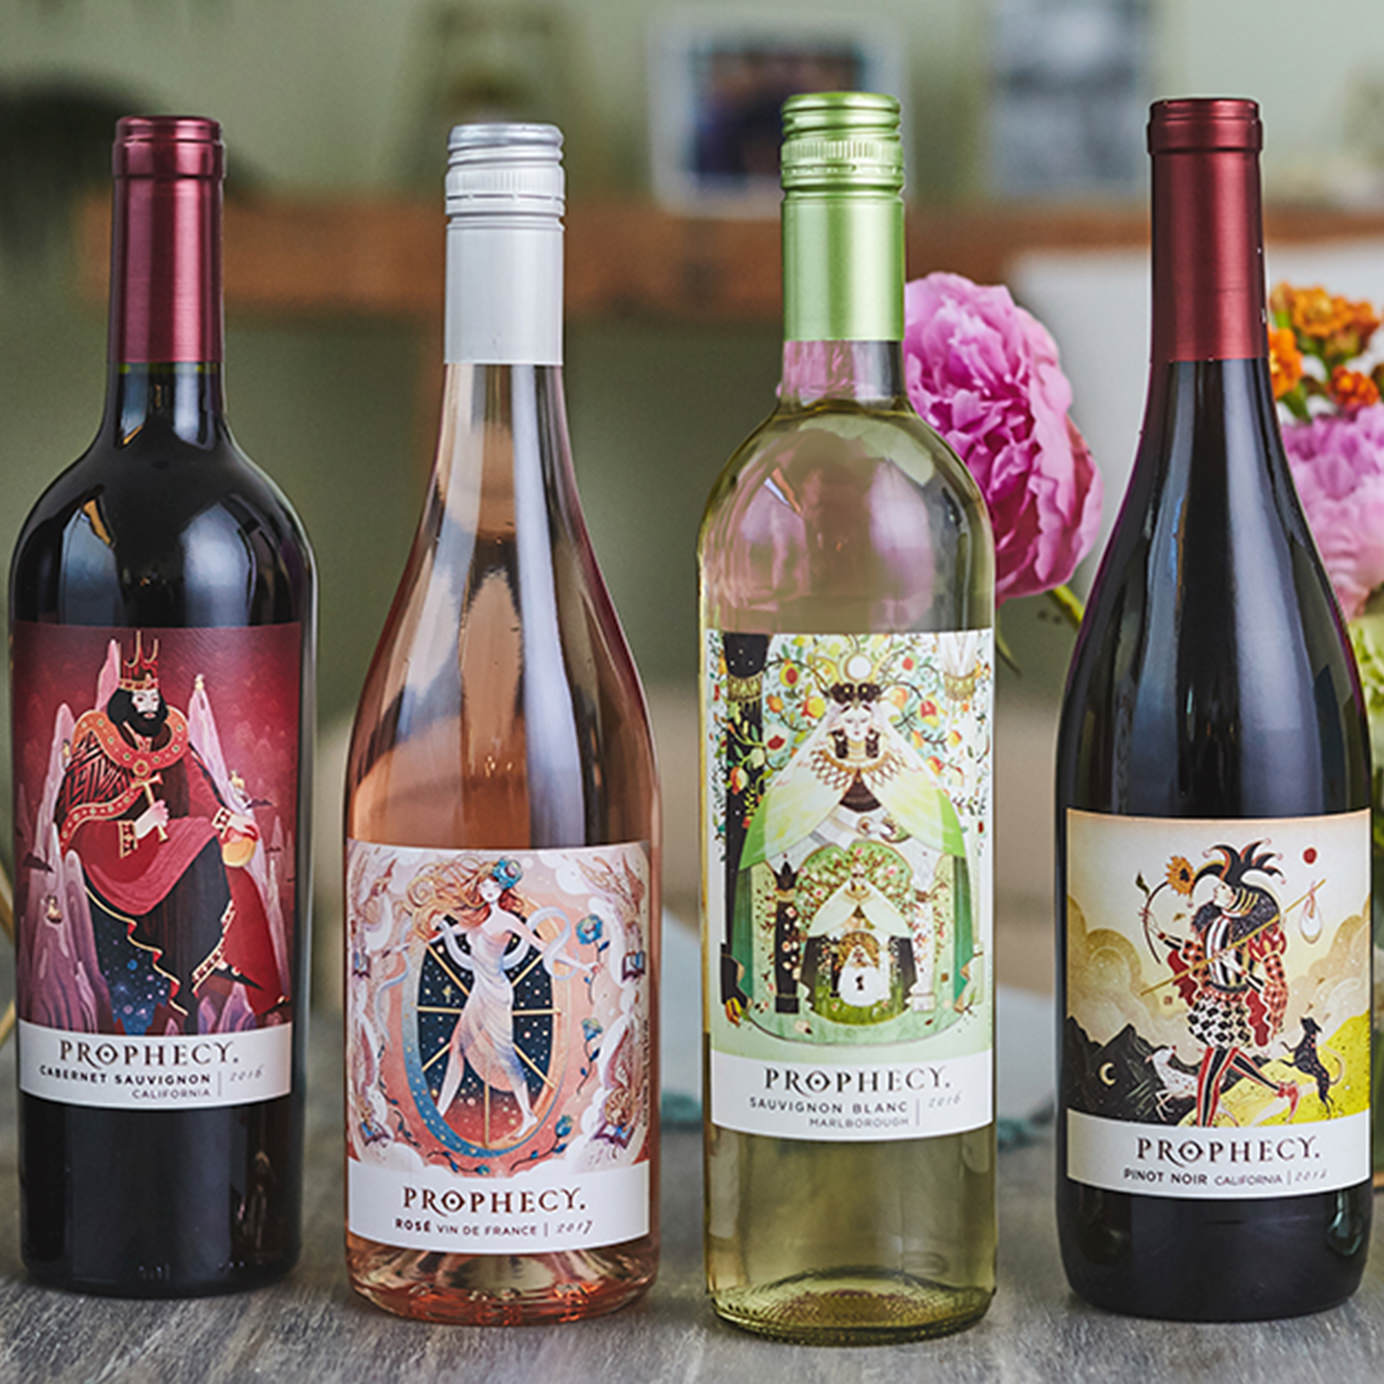 Design Behind the Vine: For Prophecy Wines, Labels Have a Delightful Deeper Meaning